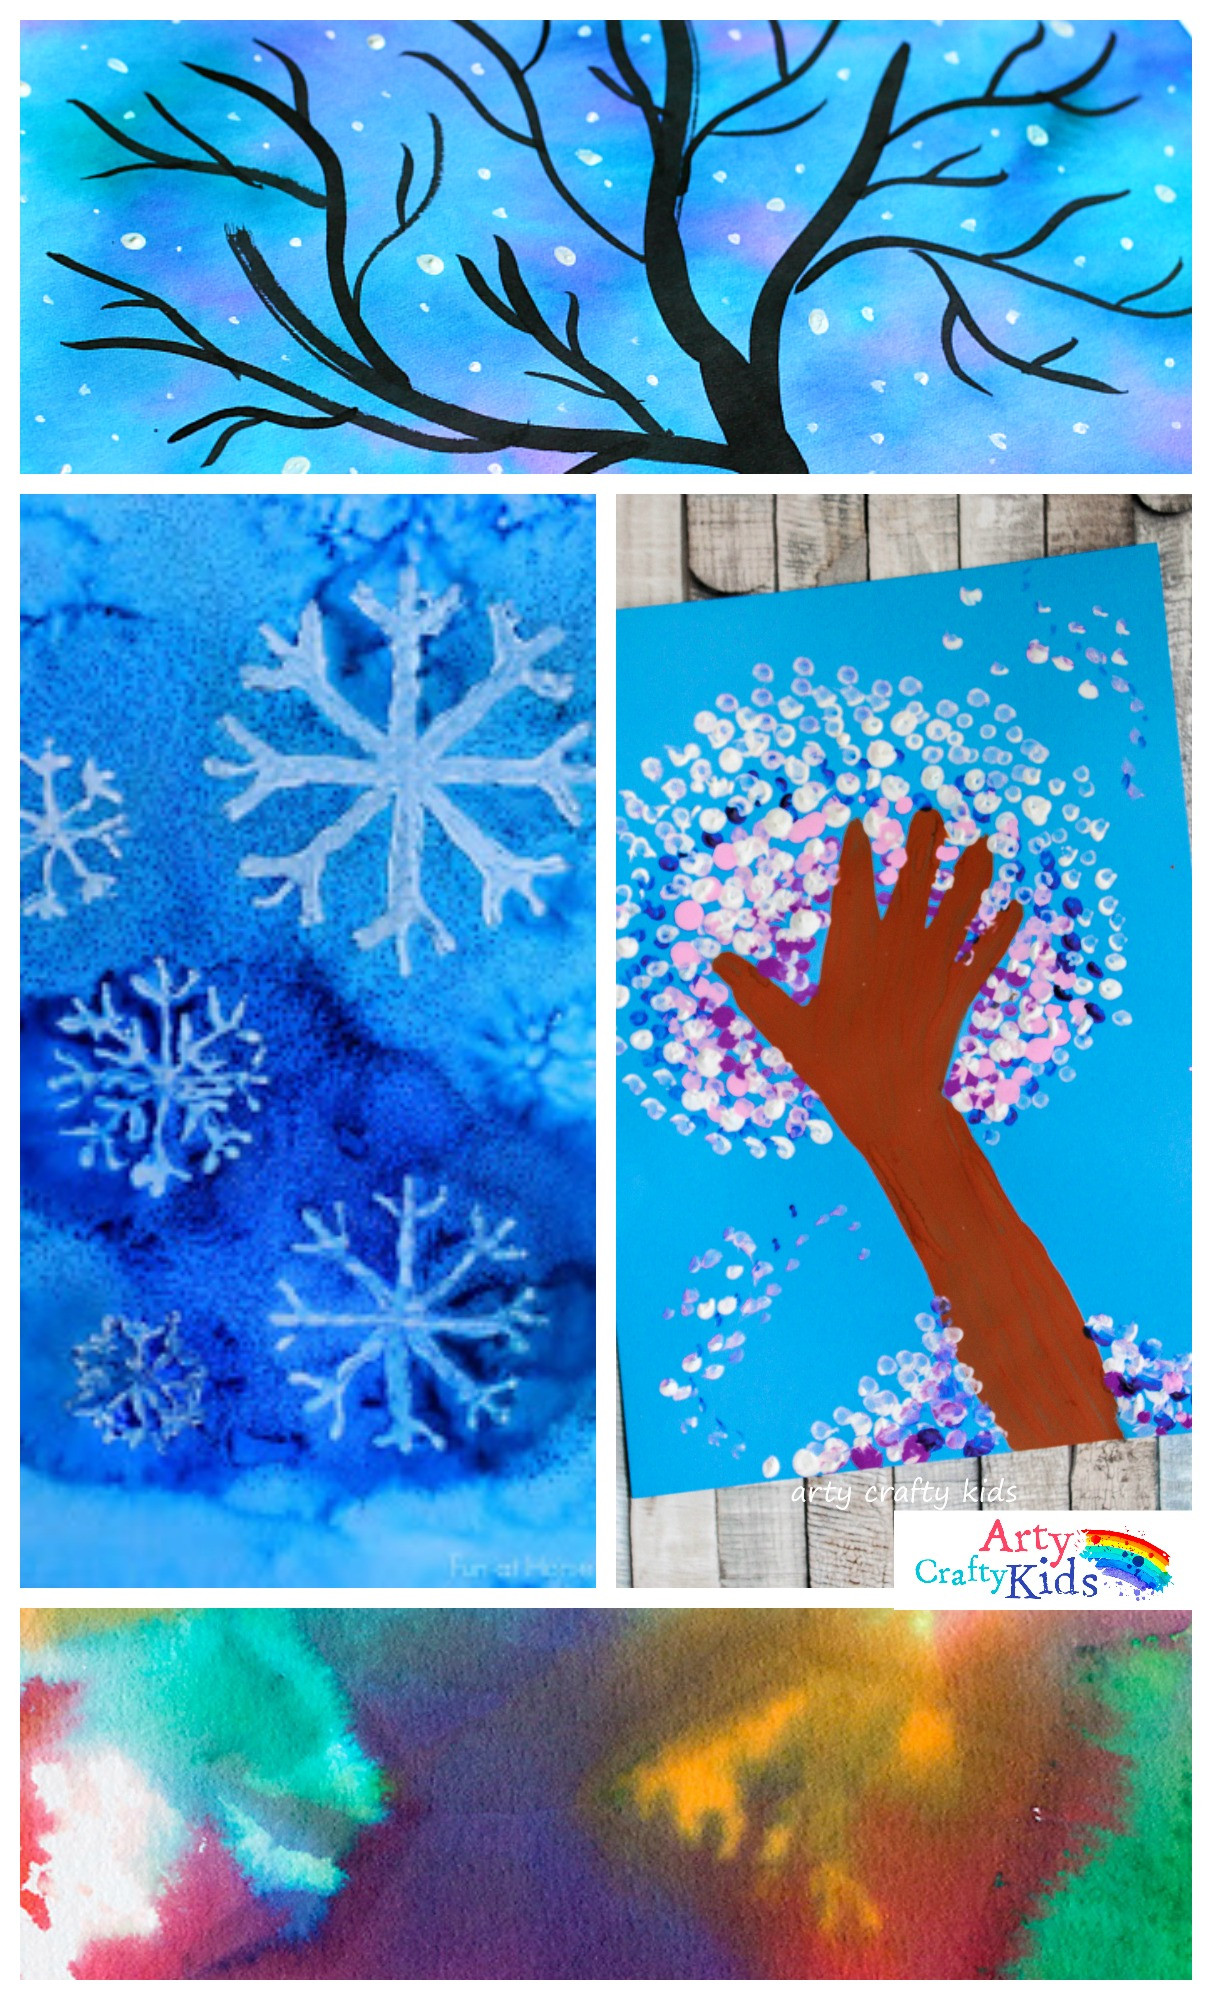 Winter Arts And Crafts For Kids
 14 Wonderful Winter Art Projects for Kids Arty Crafty Kids